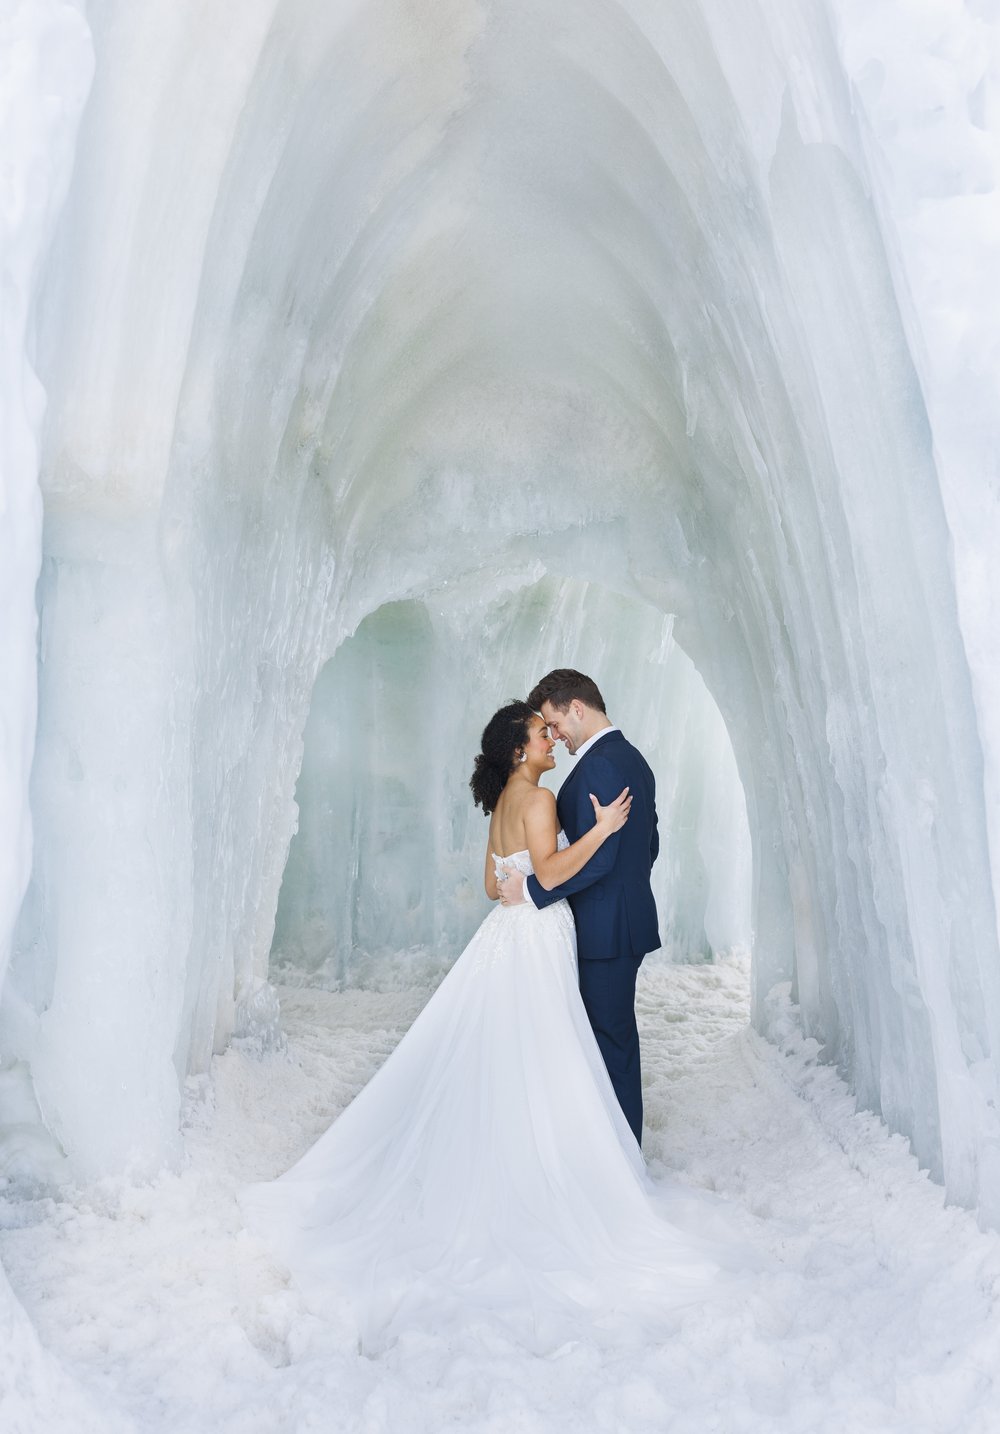 2301-03 Ice Castles Styled Bridals_06422.jpg